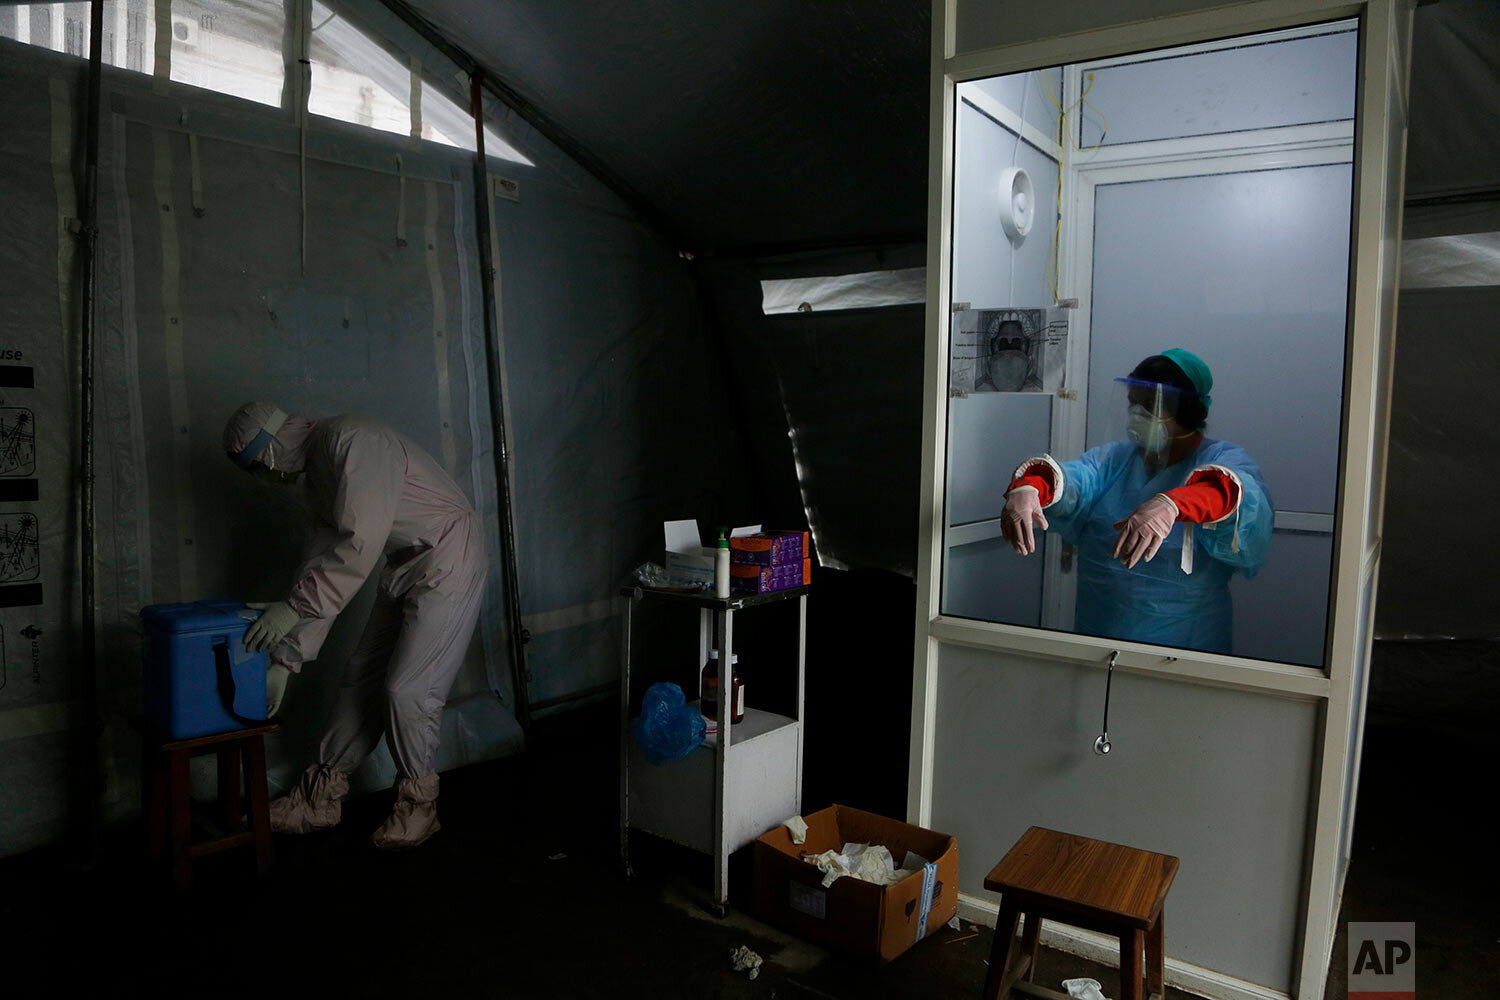  Nhuja Kaiju, left, of the RNA-16 volunteer group wearing a protective suit, helps a nurse collect swab samples of patients at a hospital in Bhaktapur, Nepal, Tuesday, May 26, 2020.  (AP Photo/Niranjan Shrestha) 